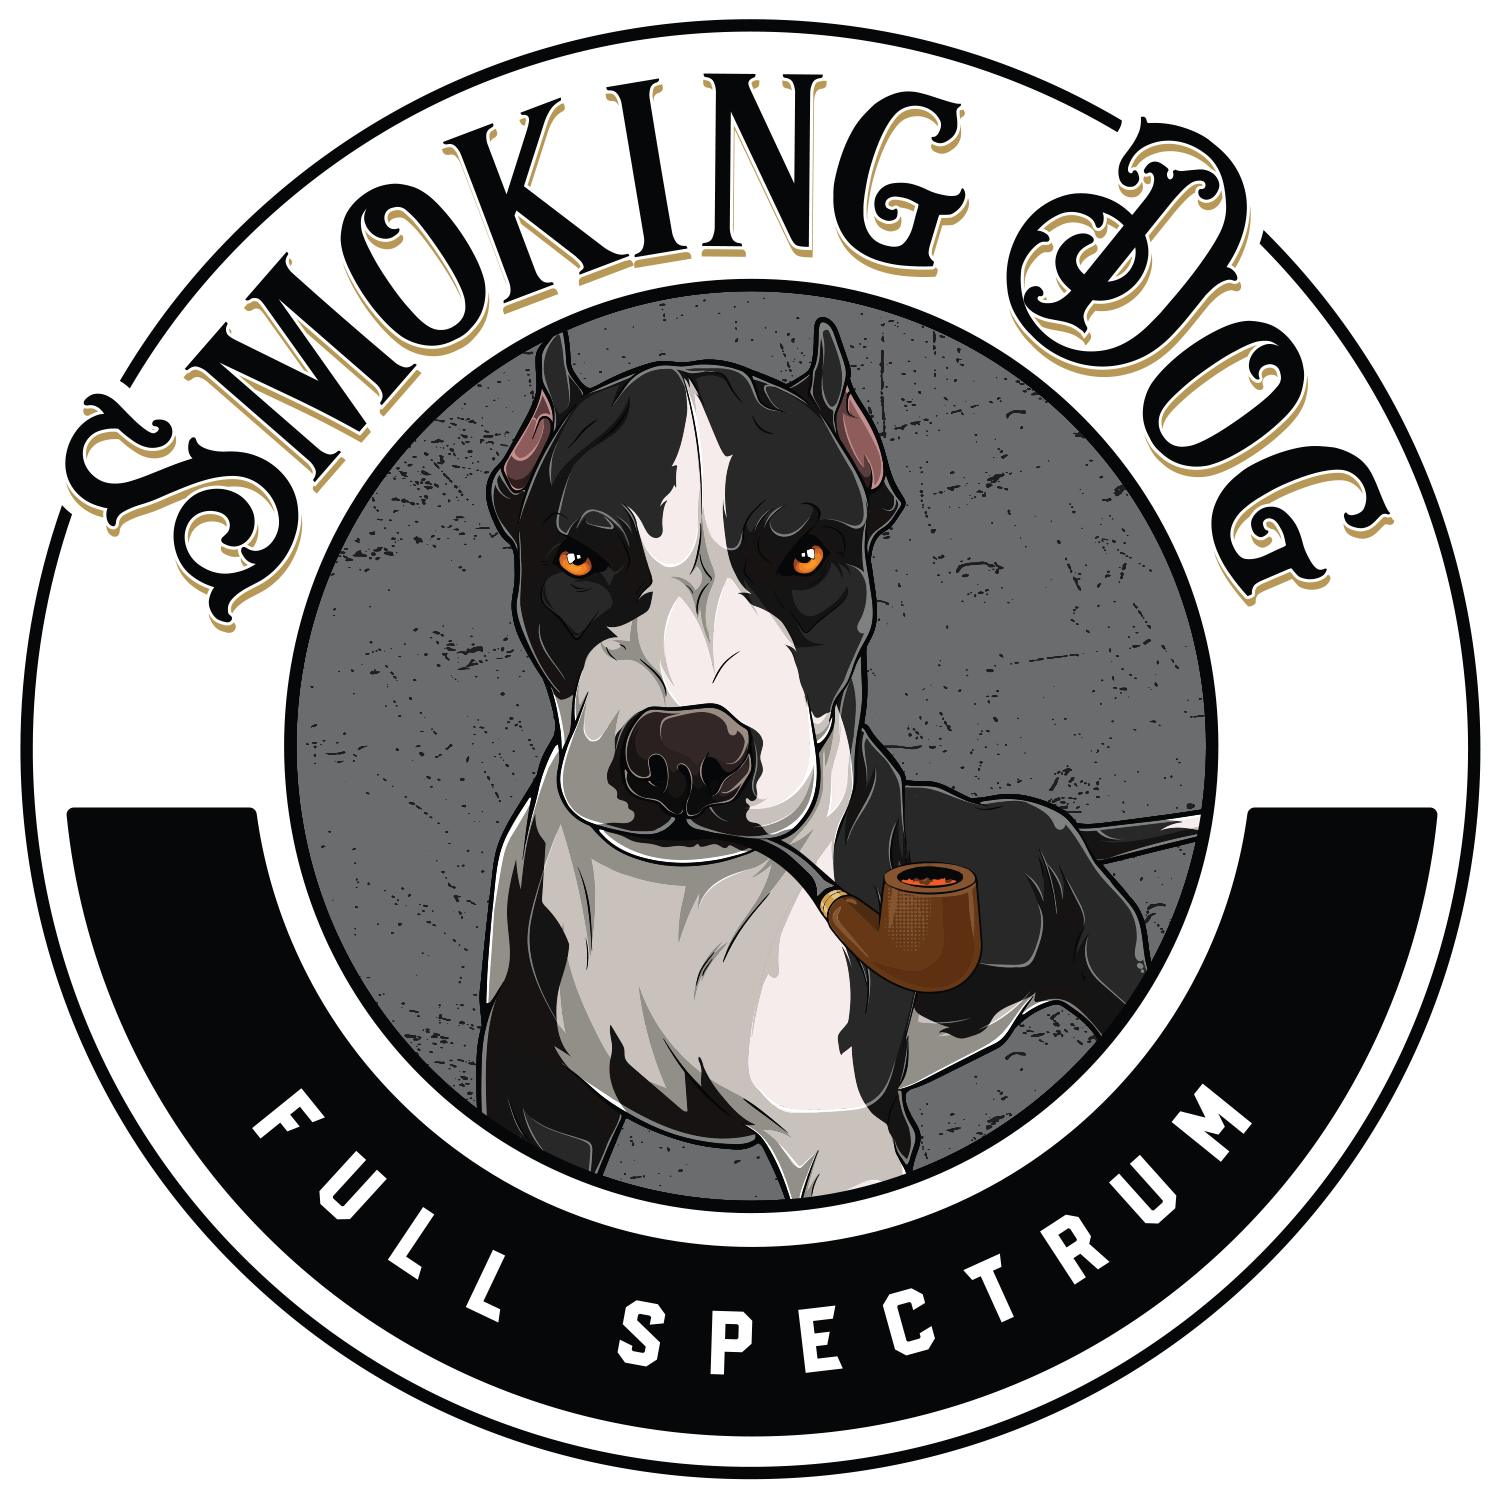 10% Off your entire purchase on Smoking Dog